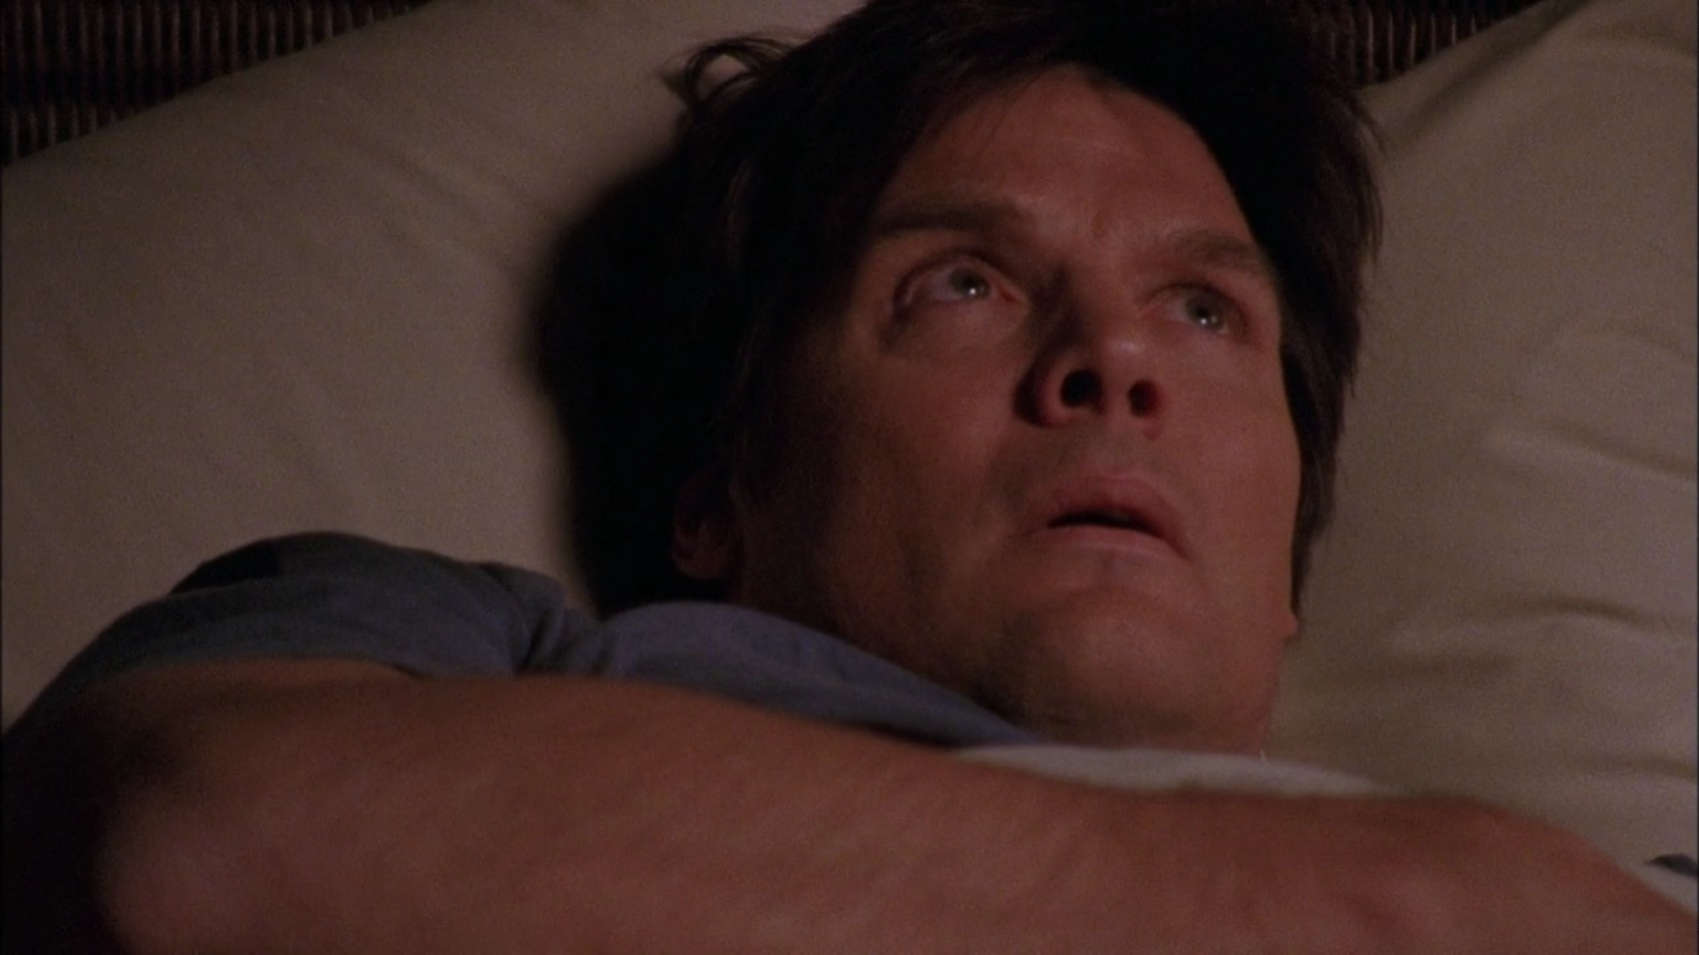 A man lies in bed worriedly staring at the ceiling in this image from Tollin/Robbins Productions.